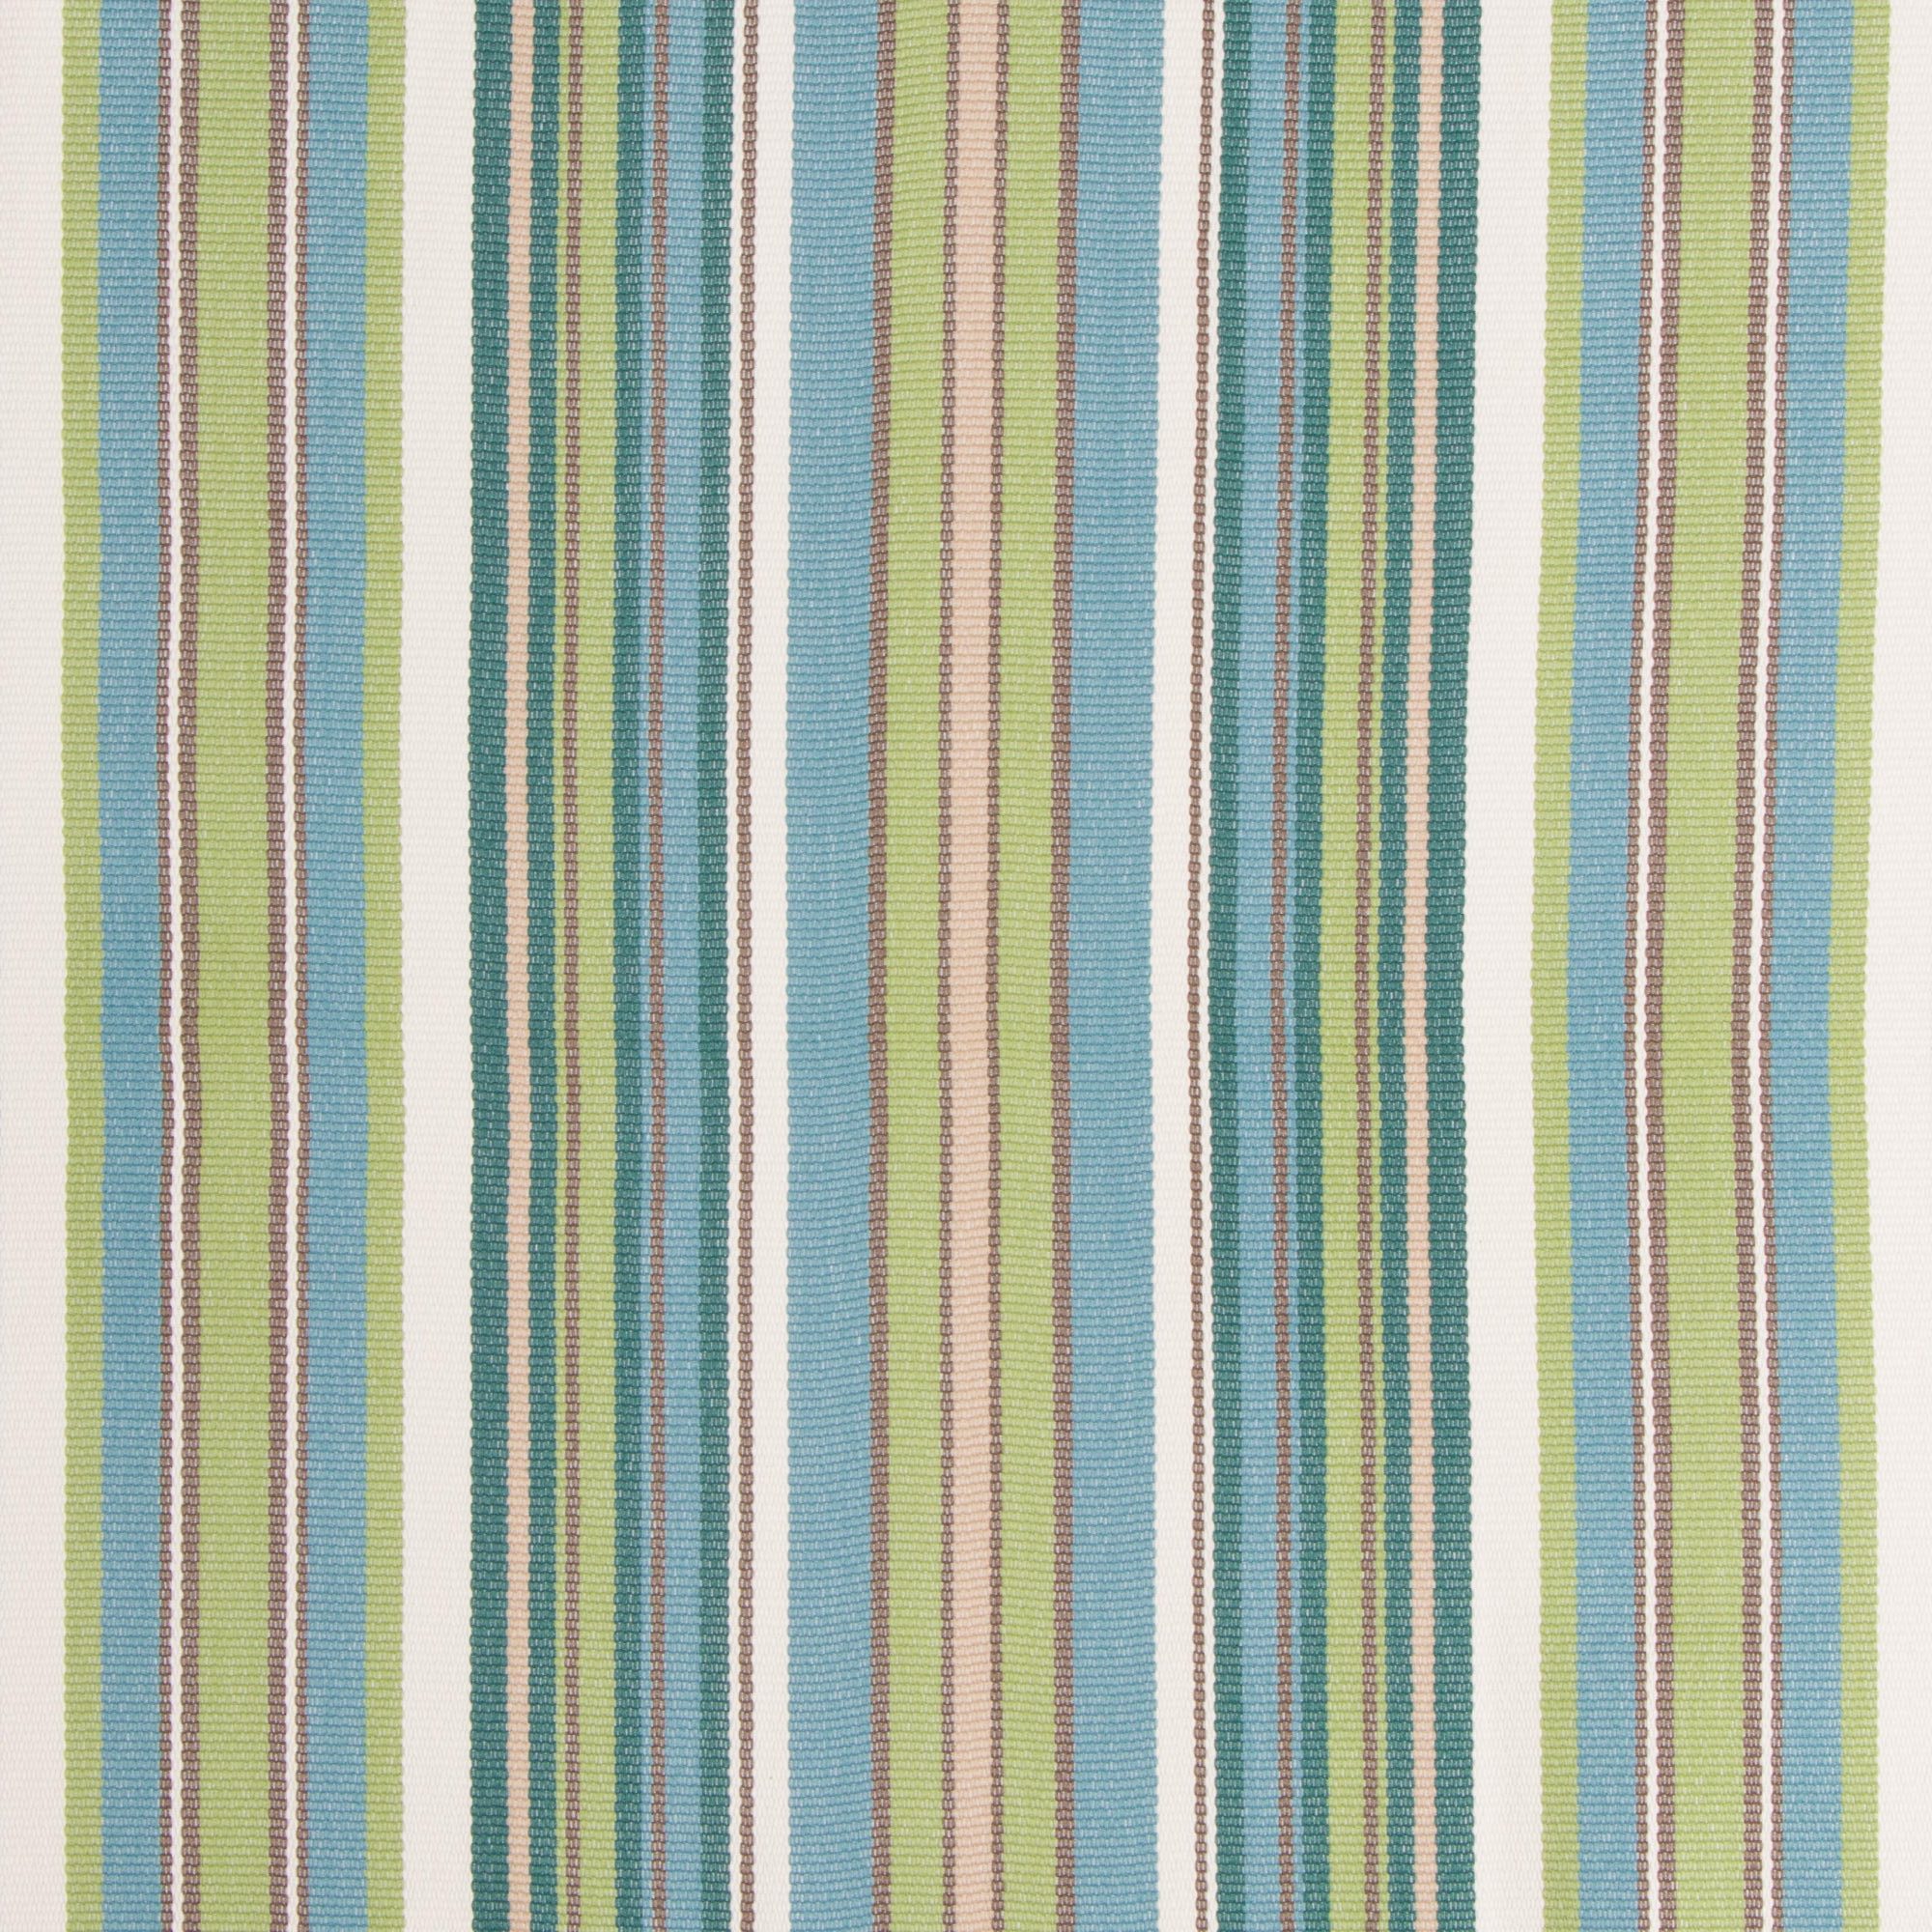 Cut yardage from Bella Dura and Bella Dura Home in the pattern Dexter and color Cerulean.